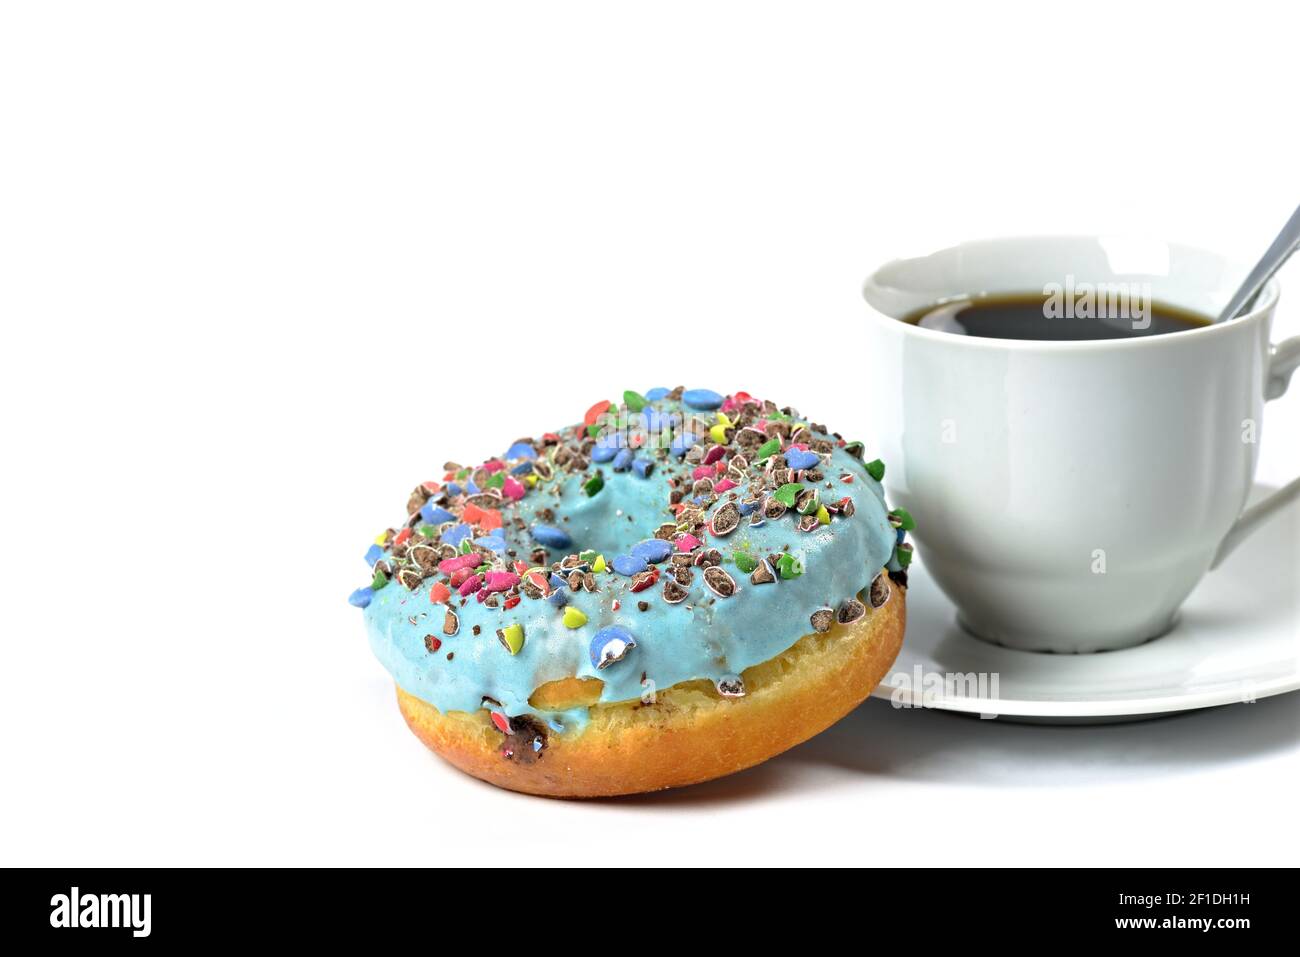 View of a sweet donut with blue icing and crushed candies. Donut on a white background with a cup of hot coffee. Sweet dish. Ready to eat. Sweet decor Stock Photo